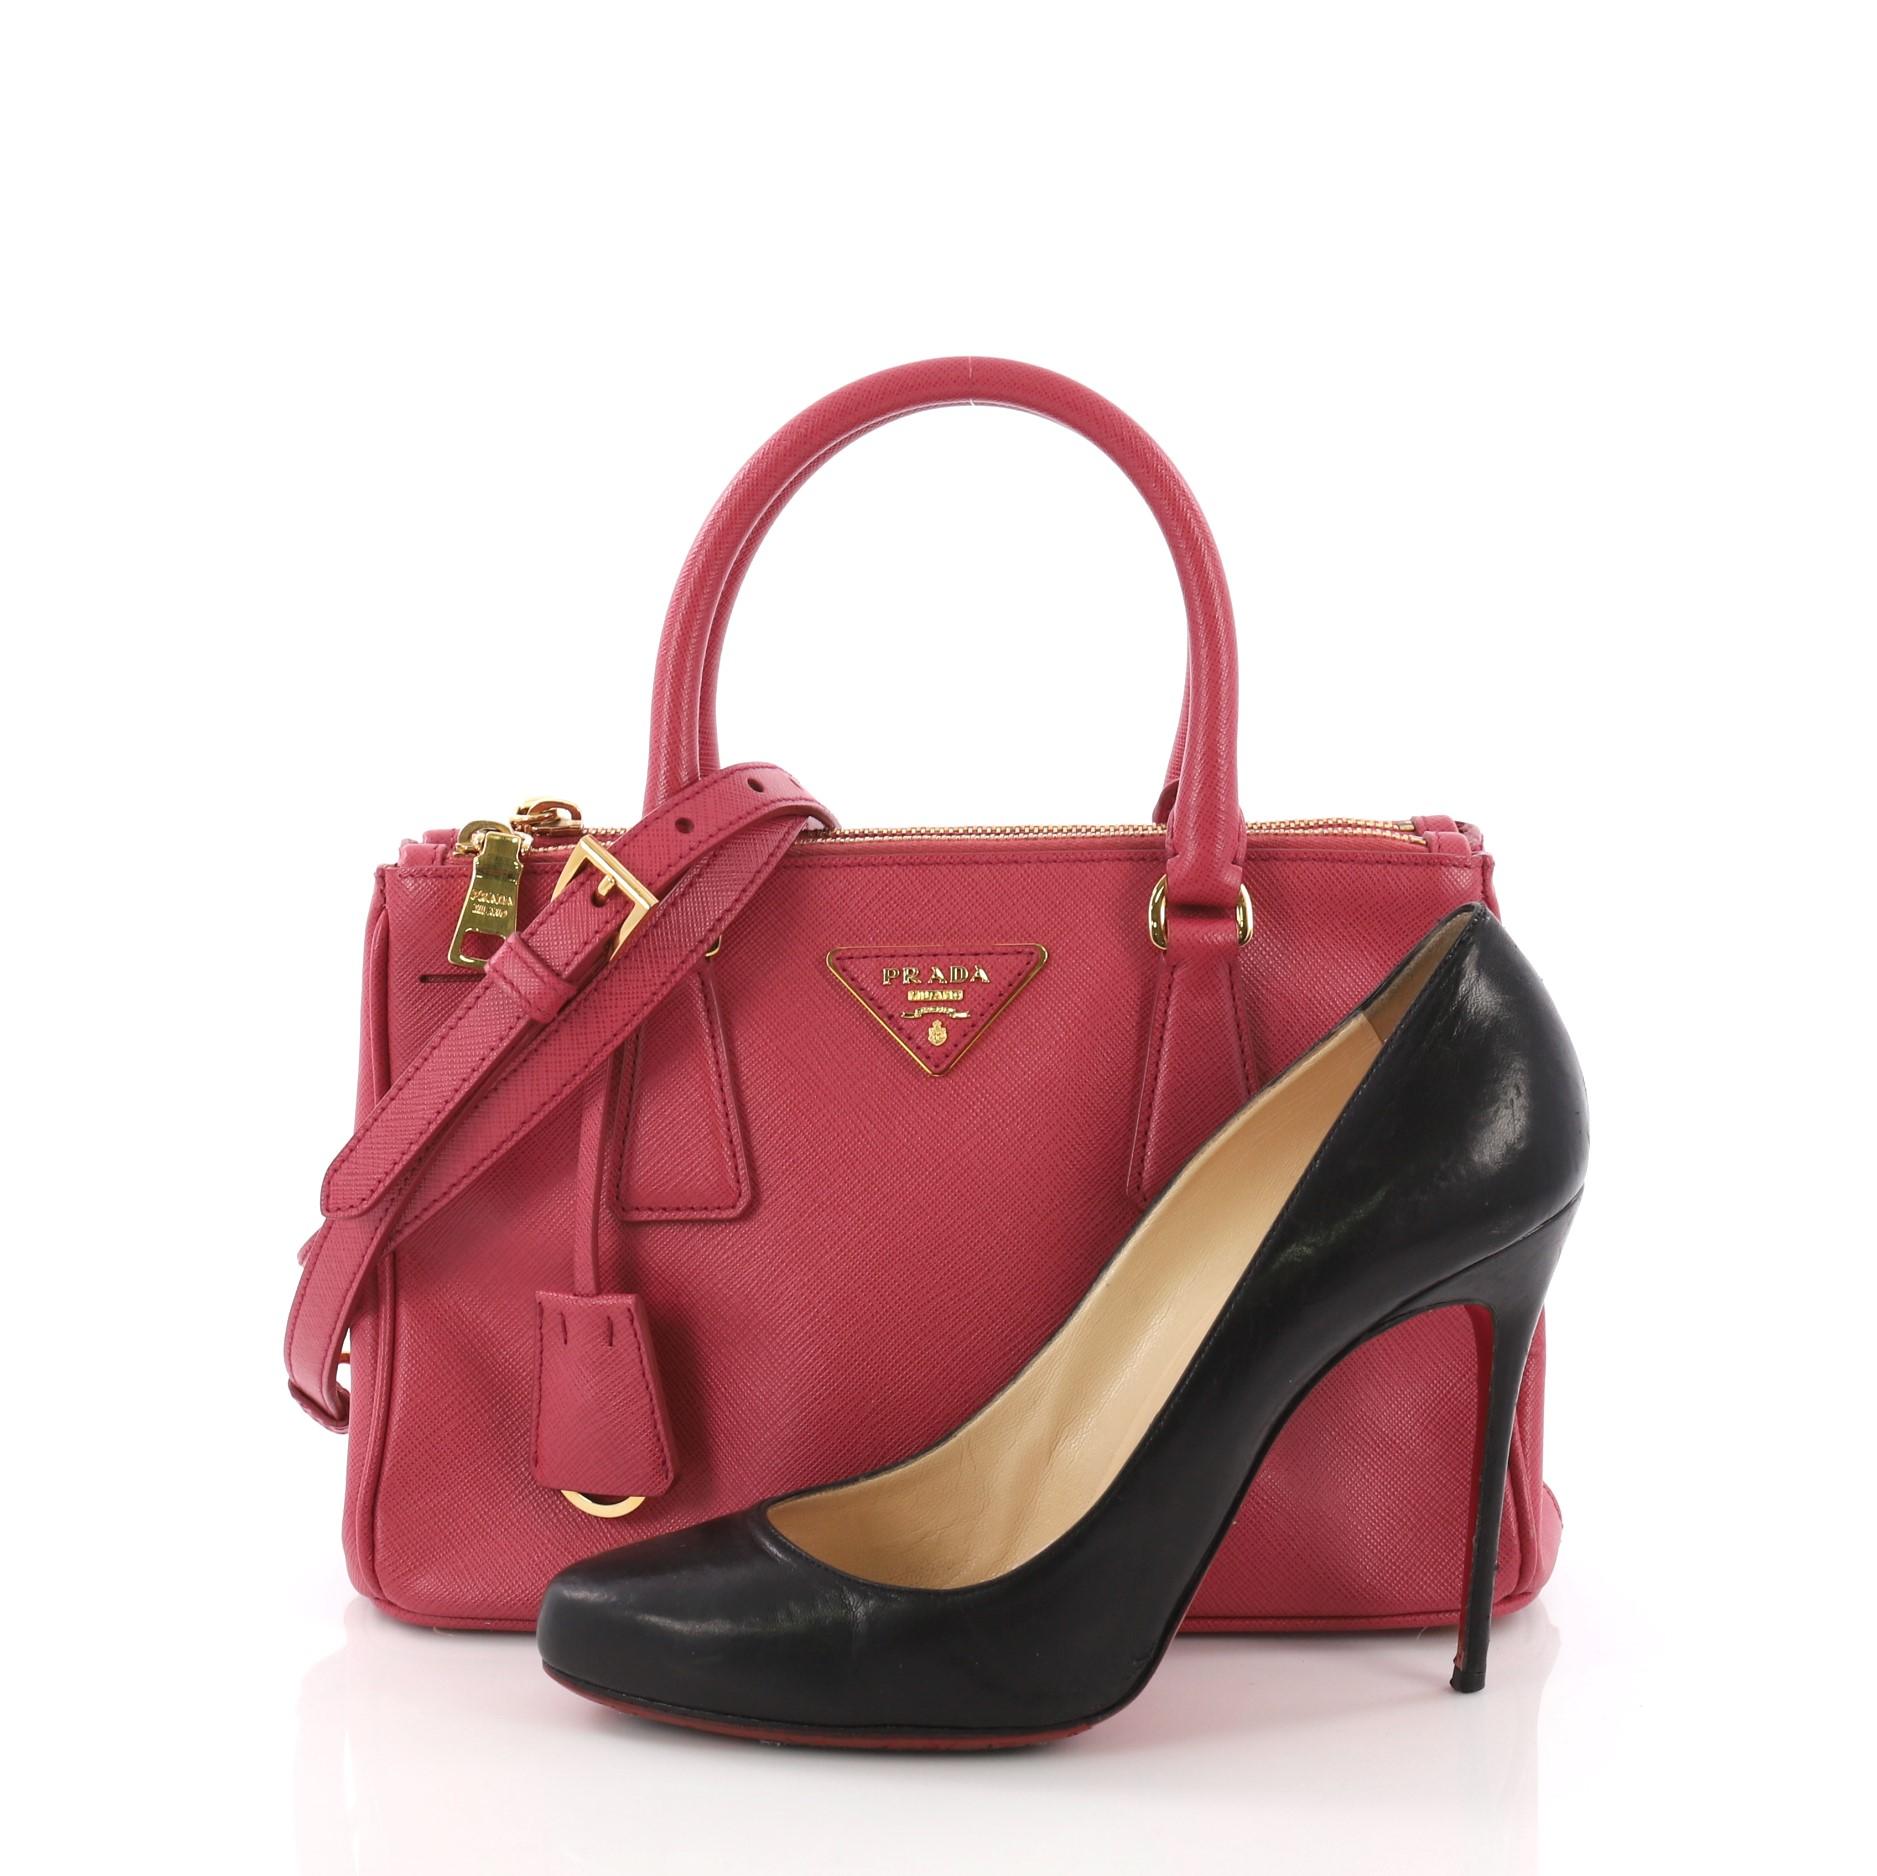 This Prada Double Zip Lux Tote Saffiano Leather Small, crafted from pink saffiano leather, features dual rolled handles, raised Prada logo plate, and gold-tone hardware. It opens to a pink fabric interior with two zip compartments on both sides and